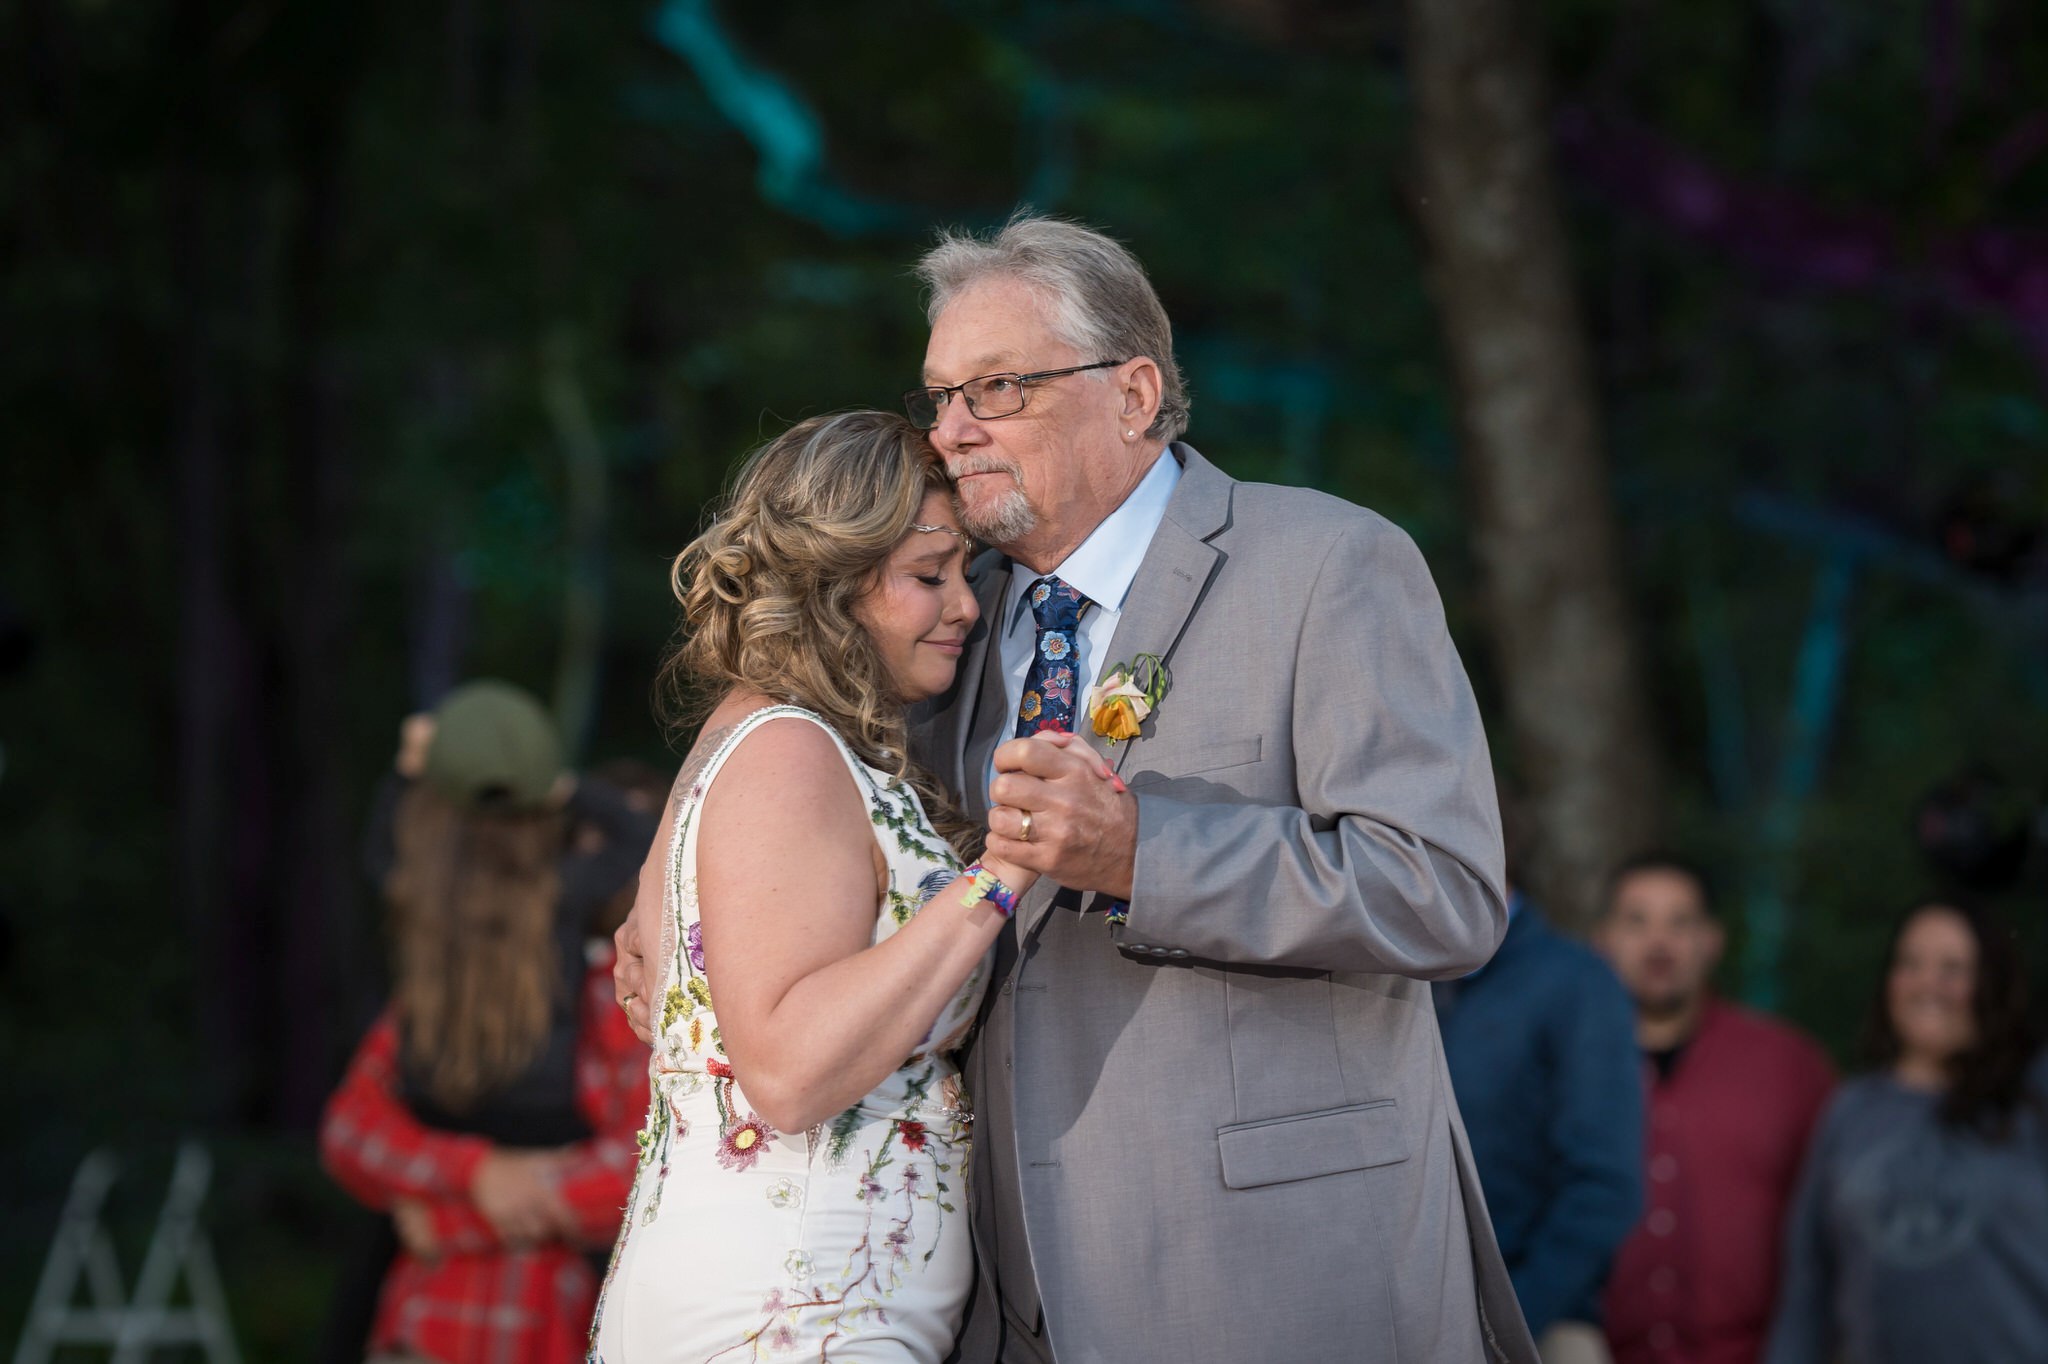 father and bride dance at outdoor EDM wedding